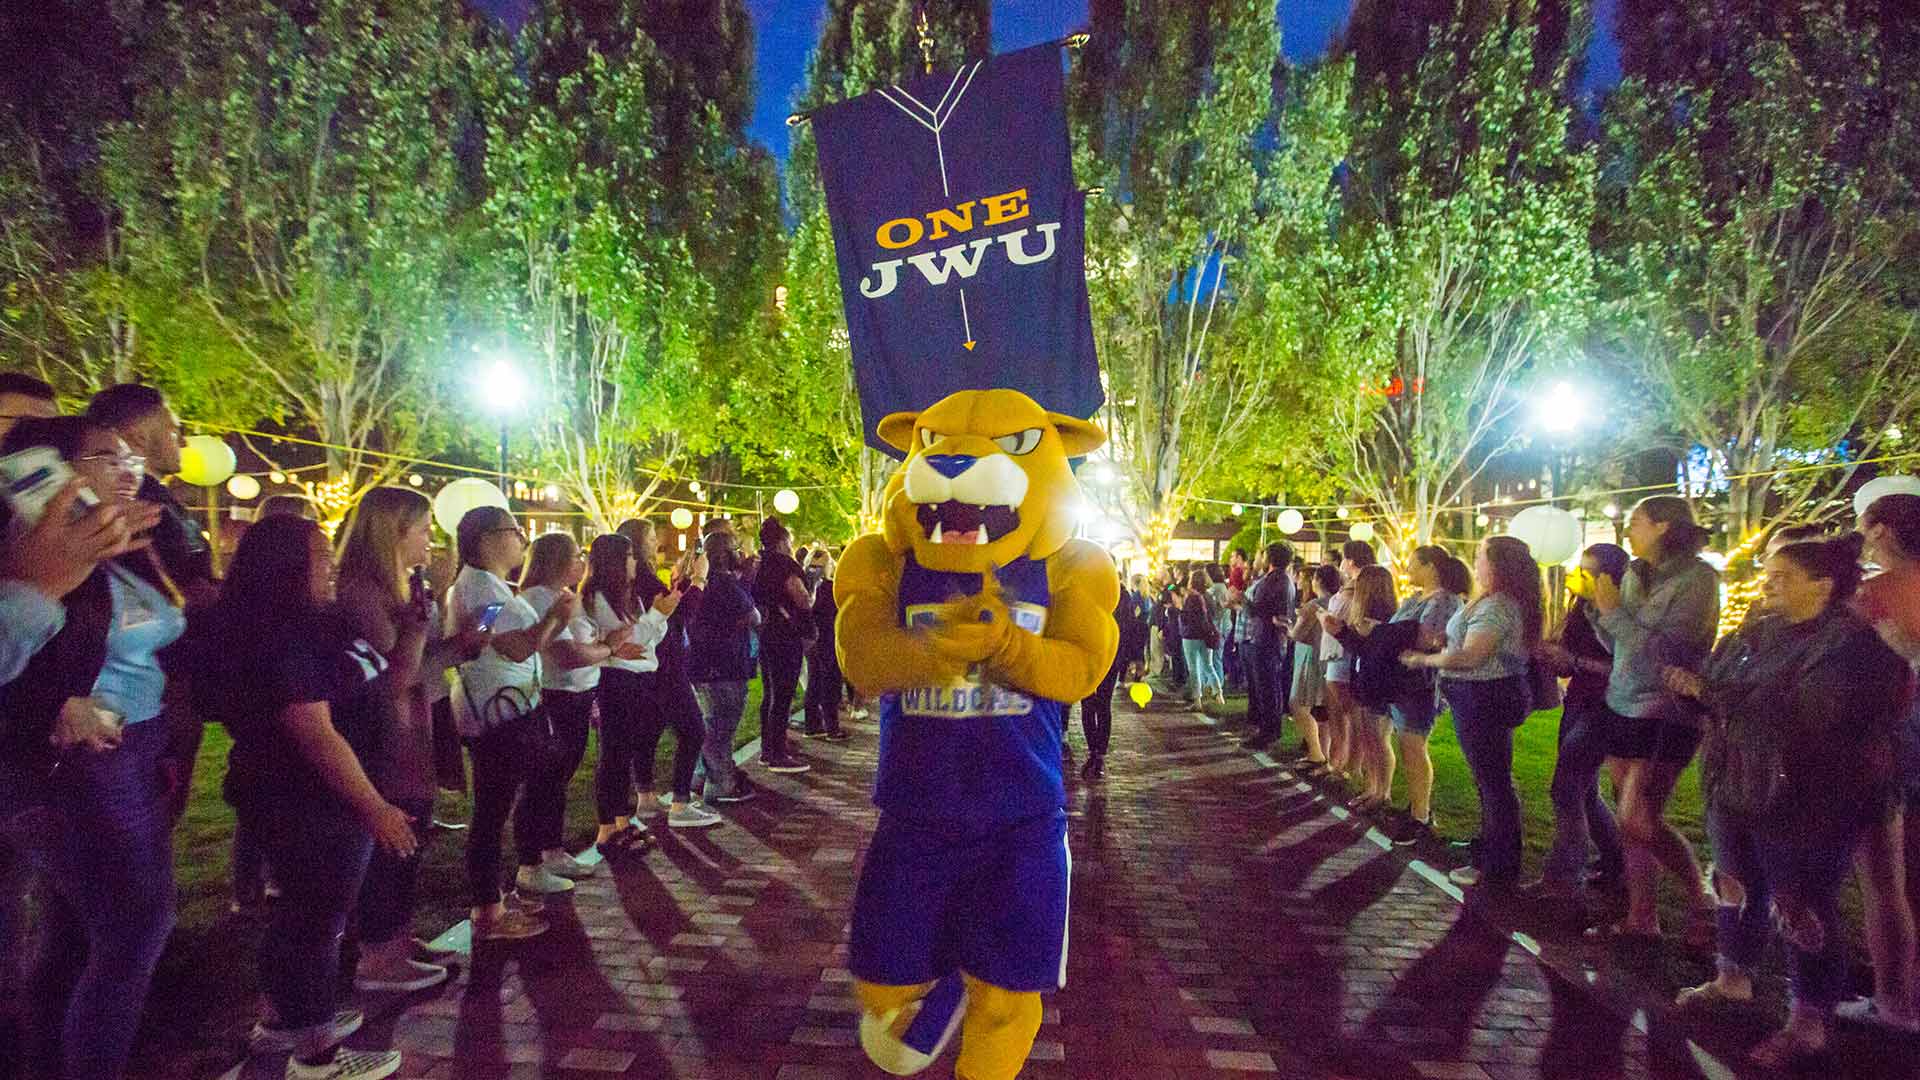 JWU's mascot Willie walks down a pathway lined with students